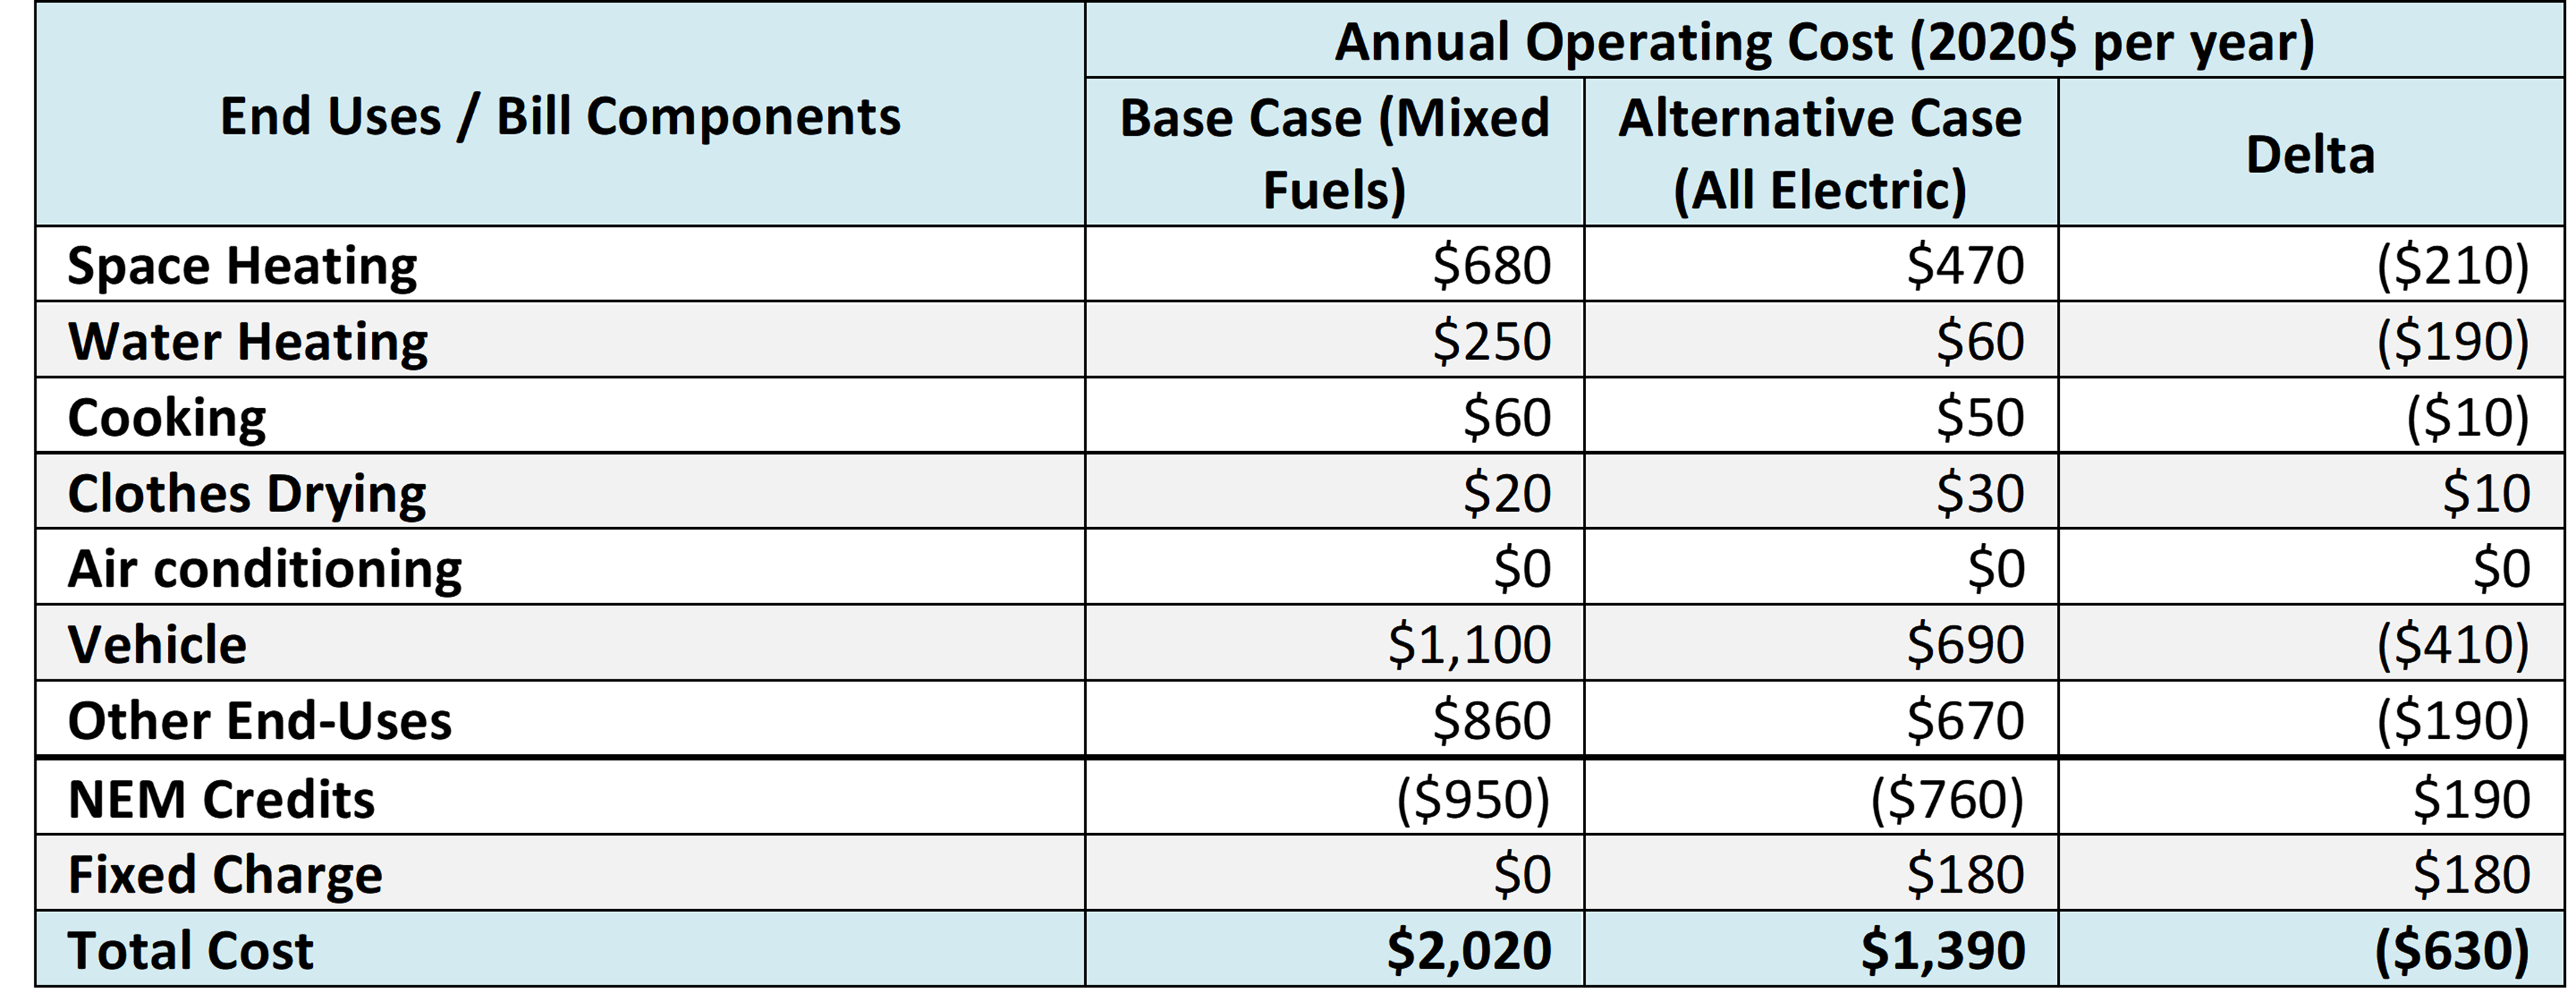 Annual bill impacts for the Base Case and for the Alternative Case